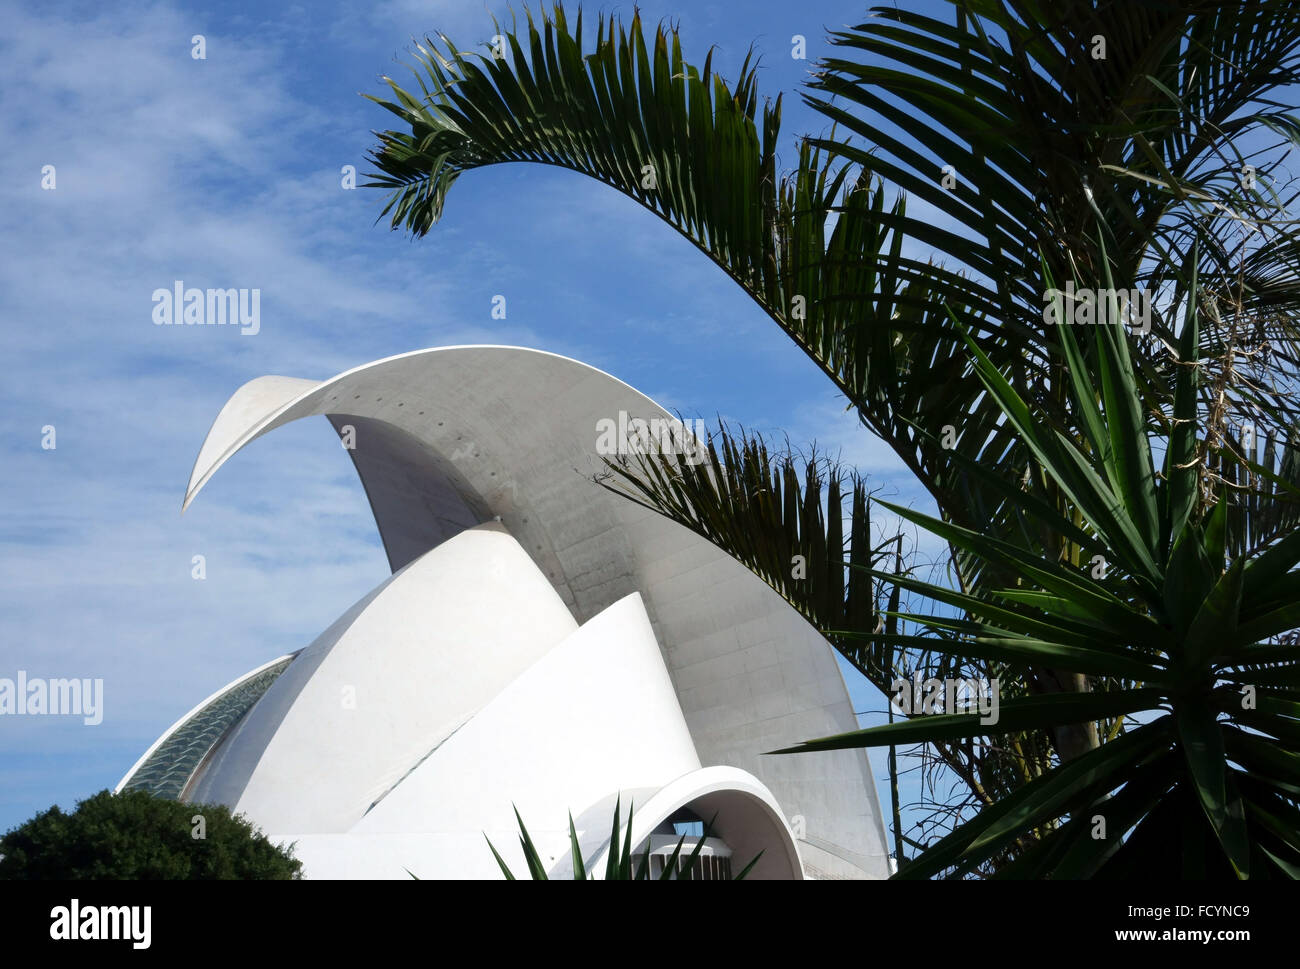 Palm trees inspired the design of the Auditorio concert hall in Santa Cruz de Tenerife, Canary Islands, Spain Stock Photo